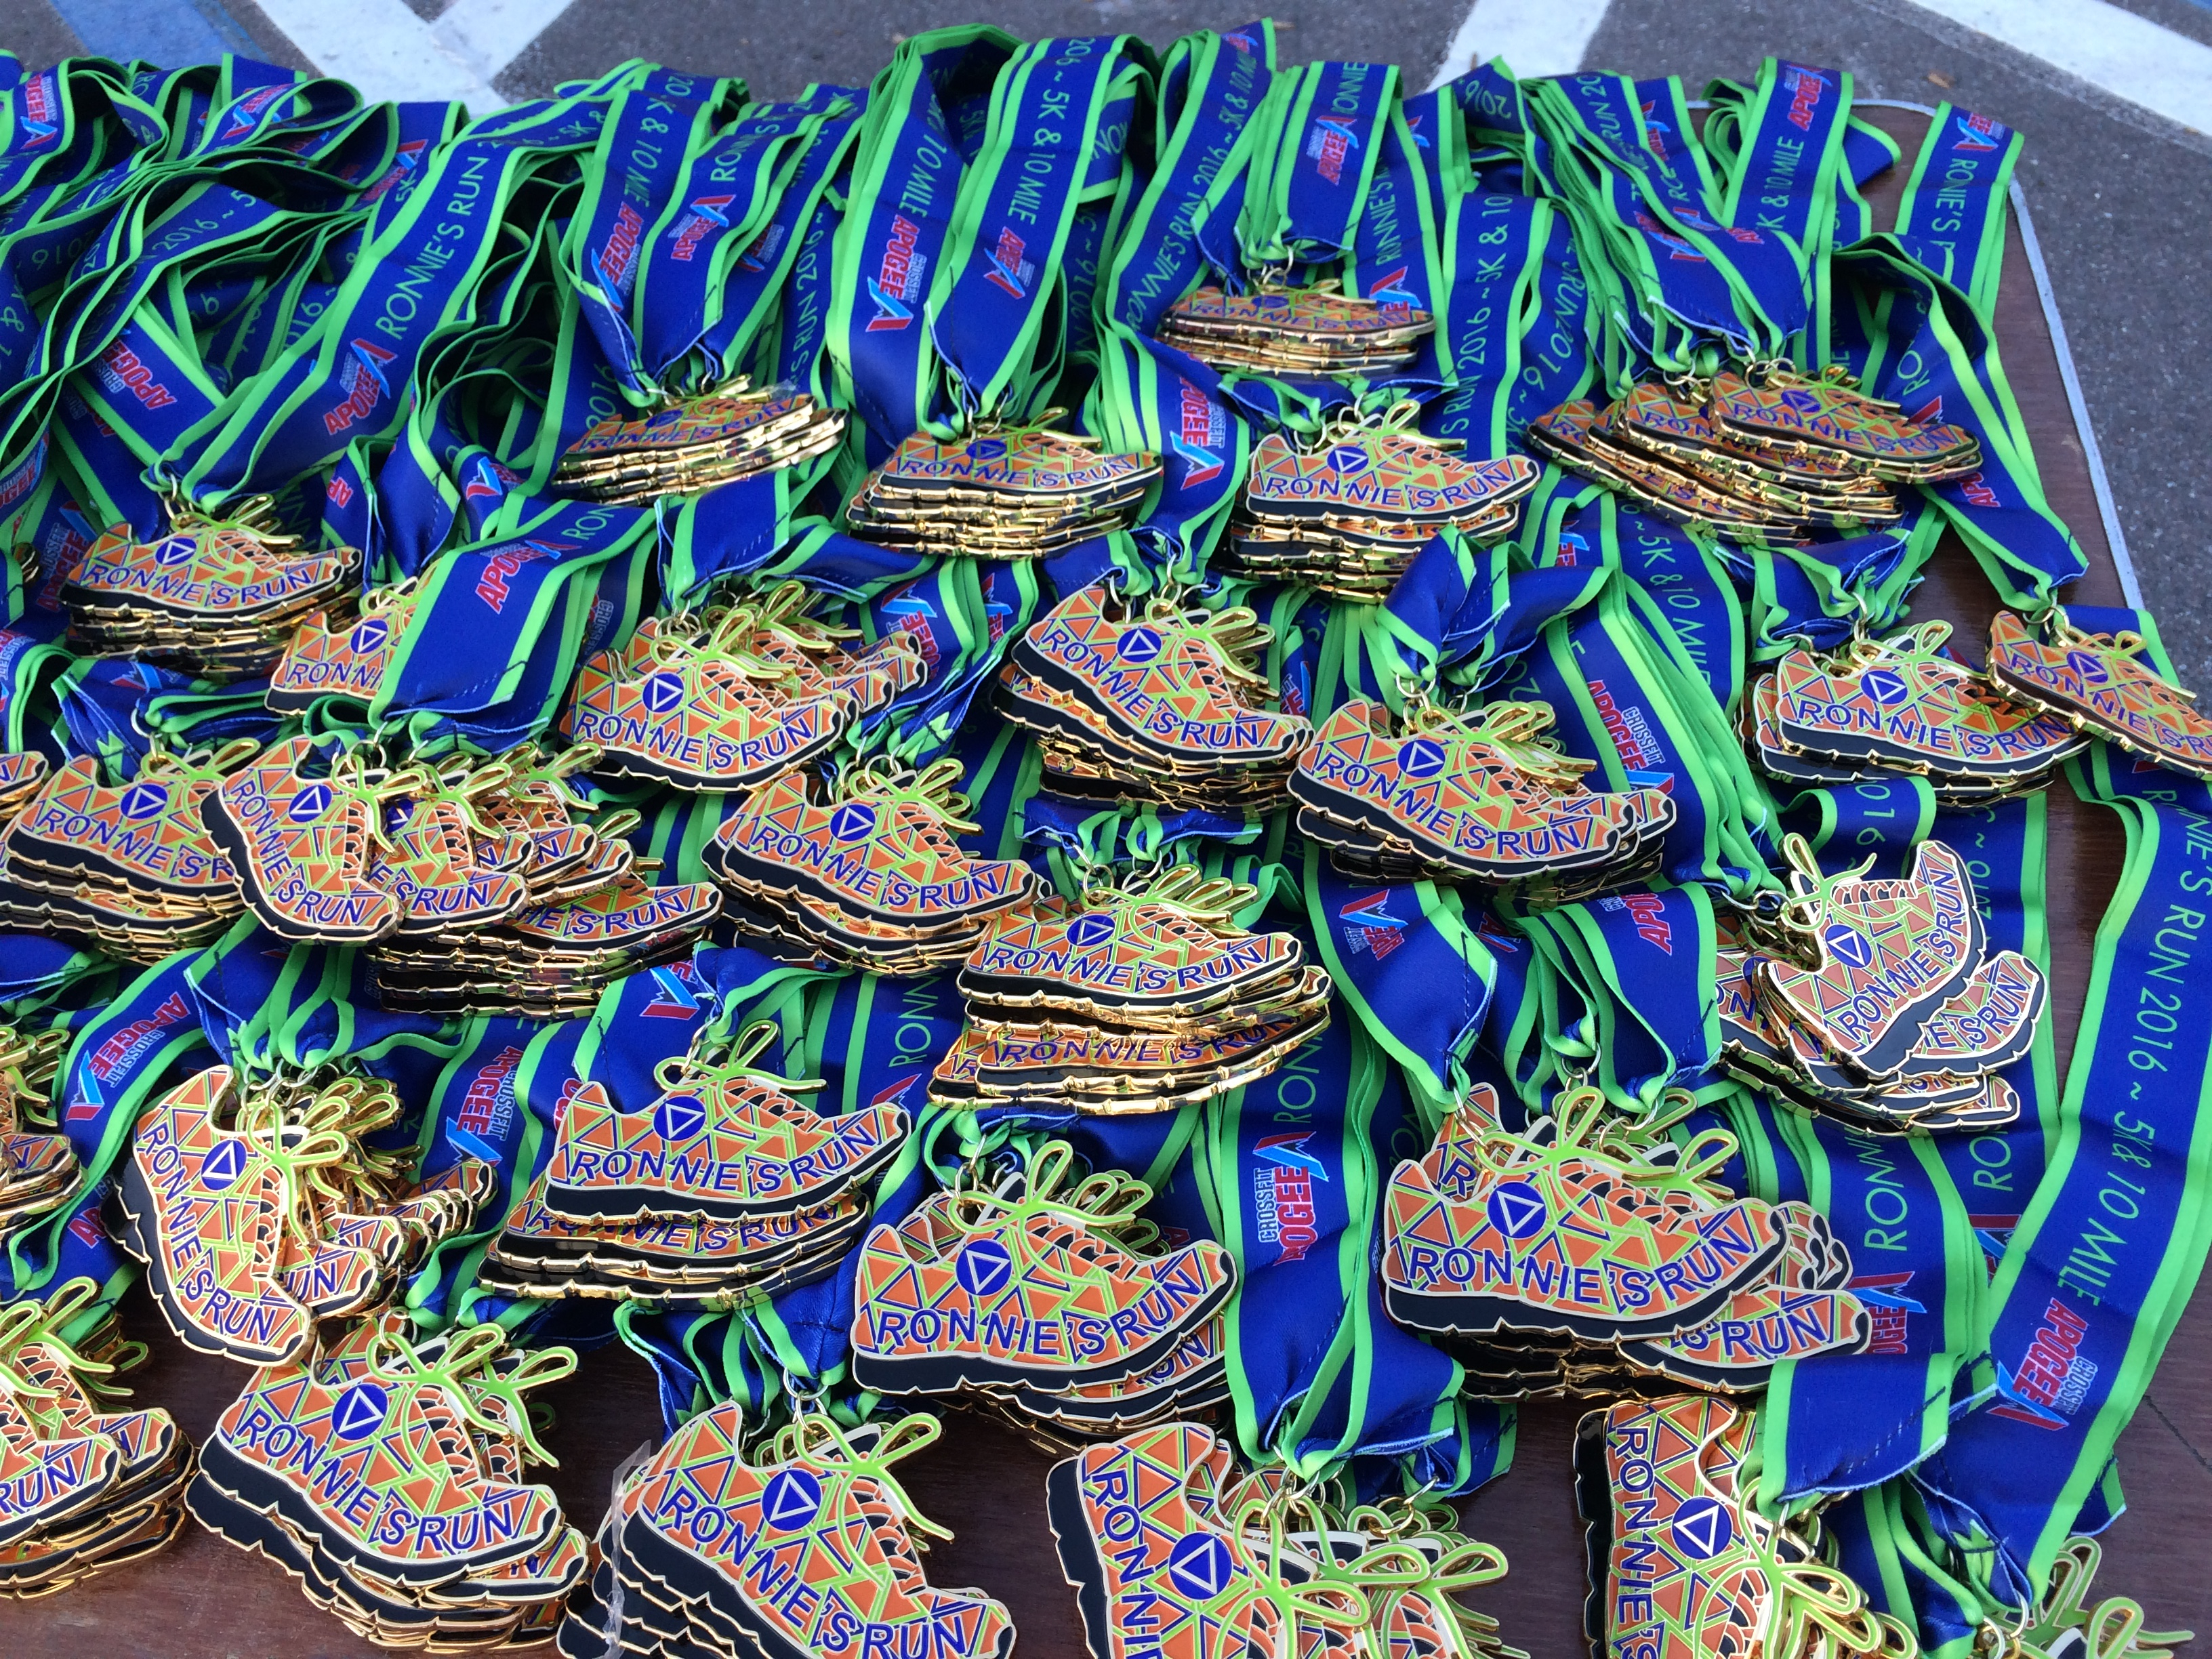 2016 finisher medals for Ronnie's Run at Fort DeSoto Park.